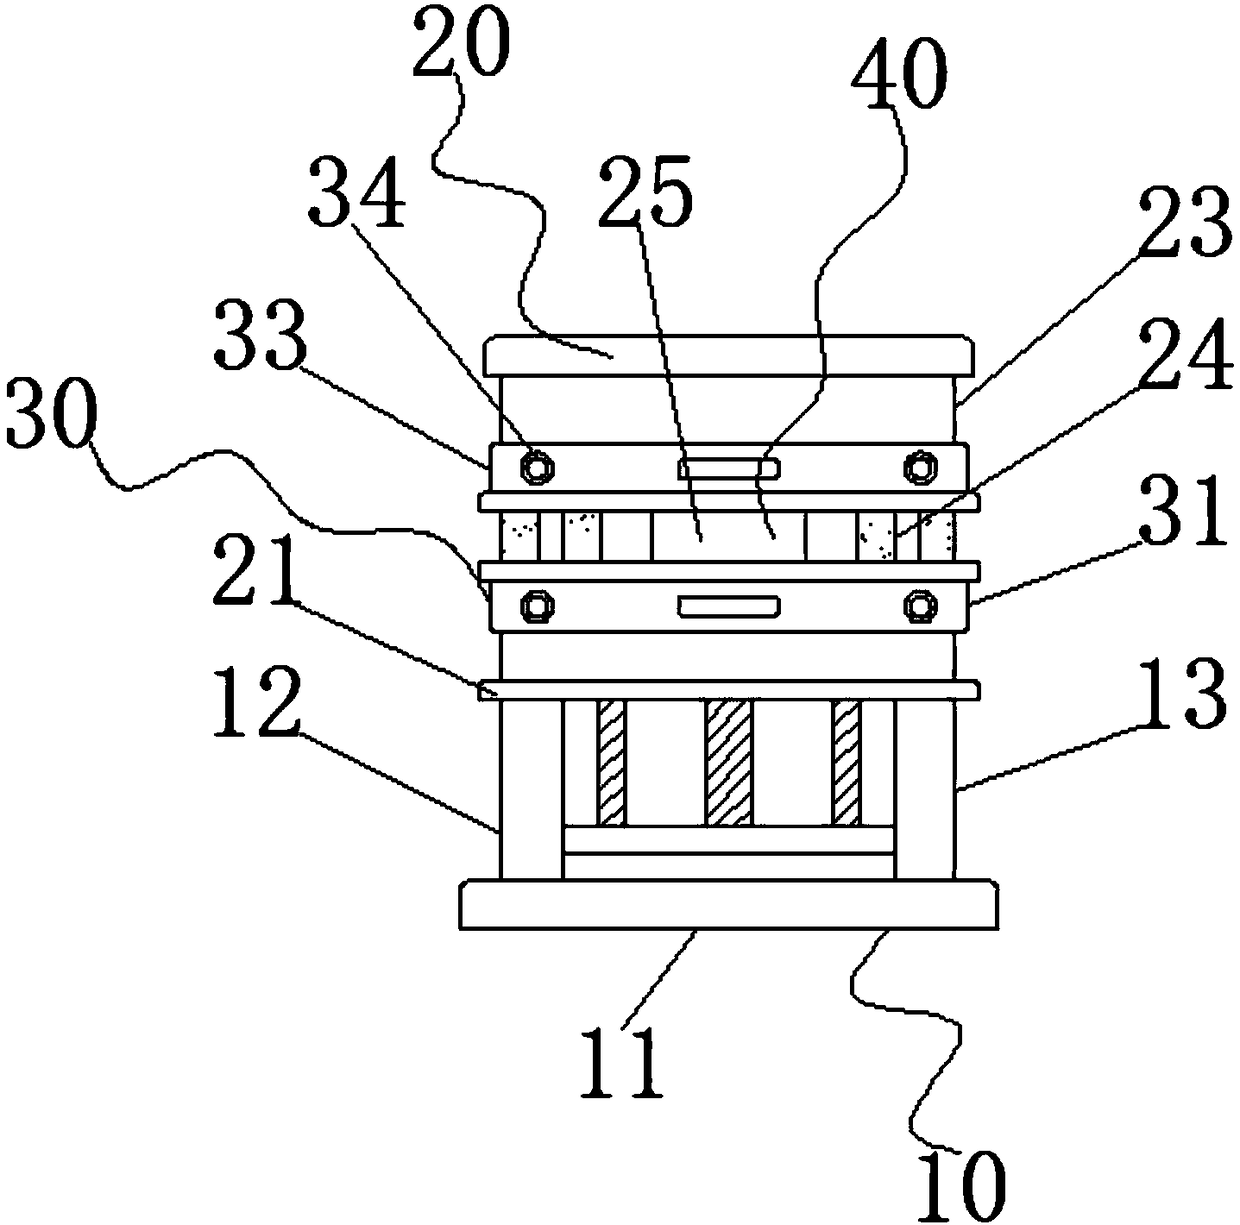 Injection mold capable of quickly achieving demolding